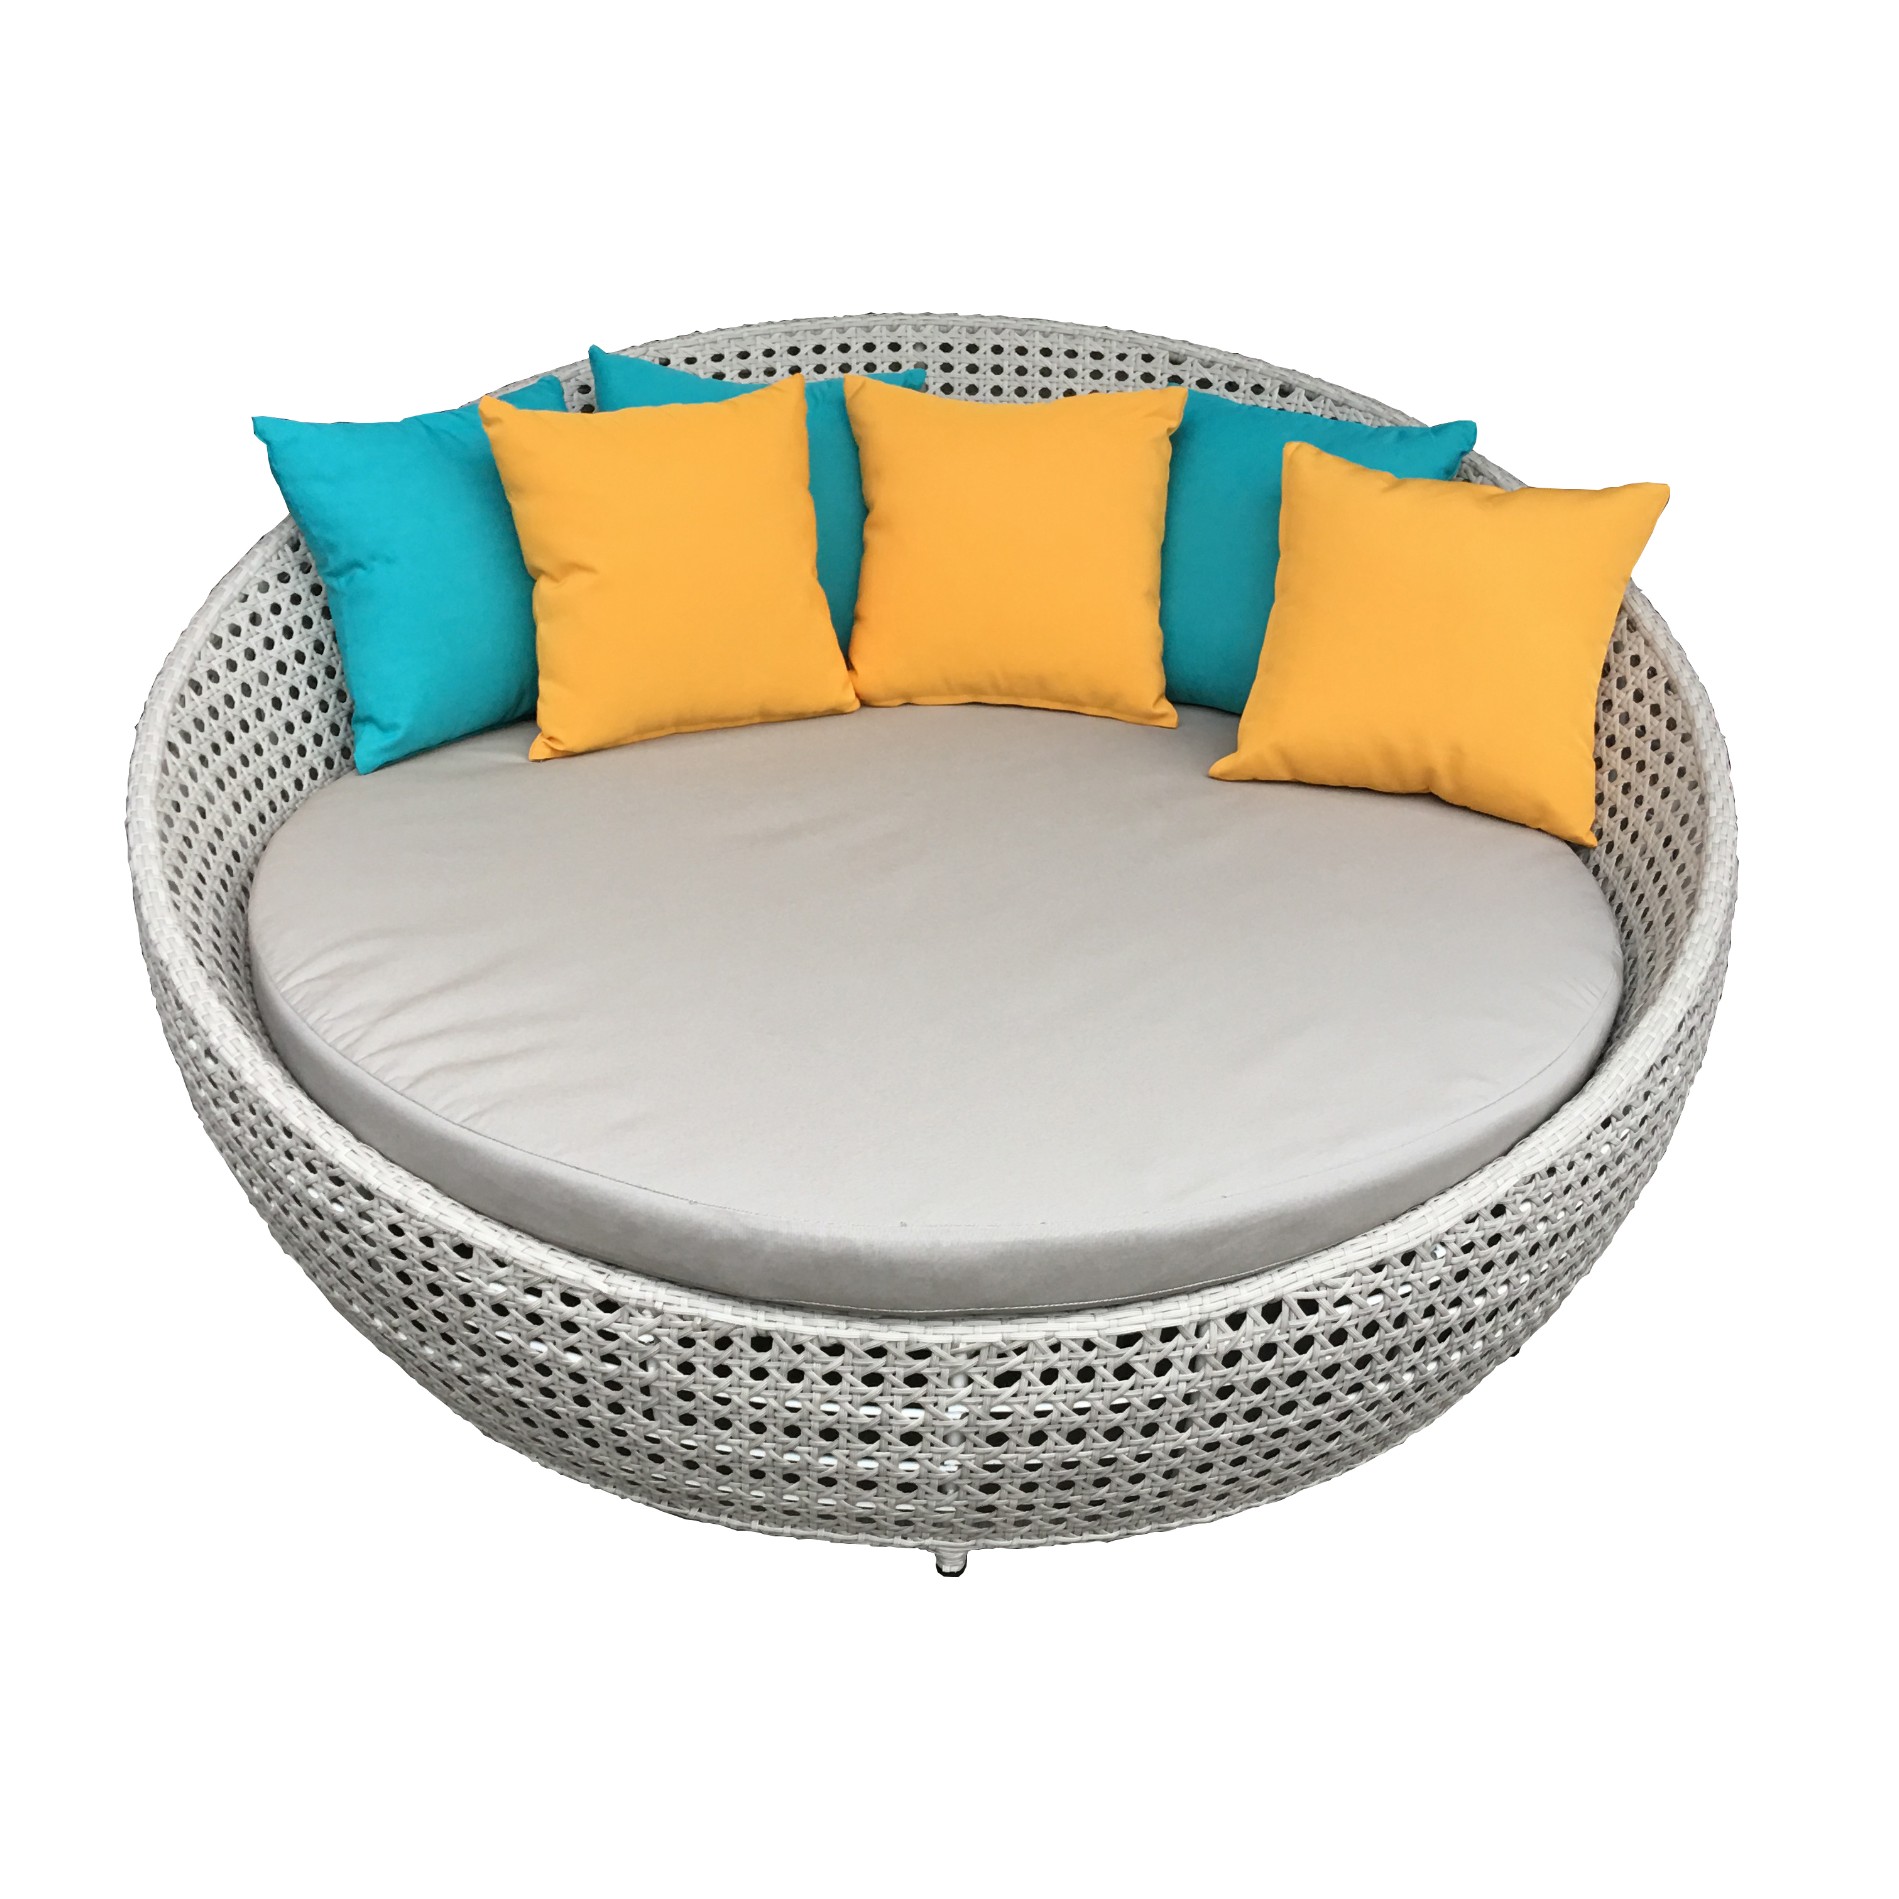 Outdoor wicker daybed / round daybed